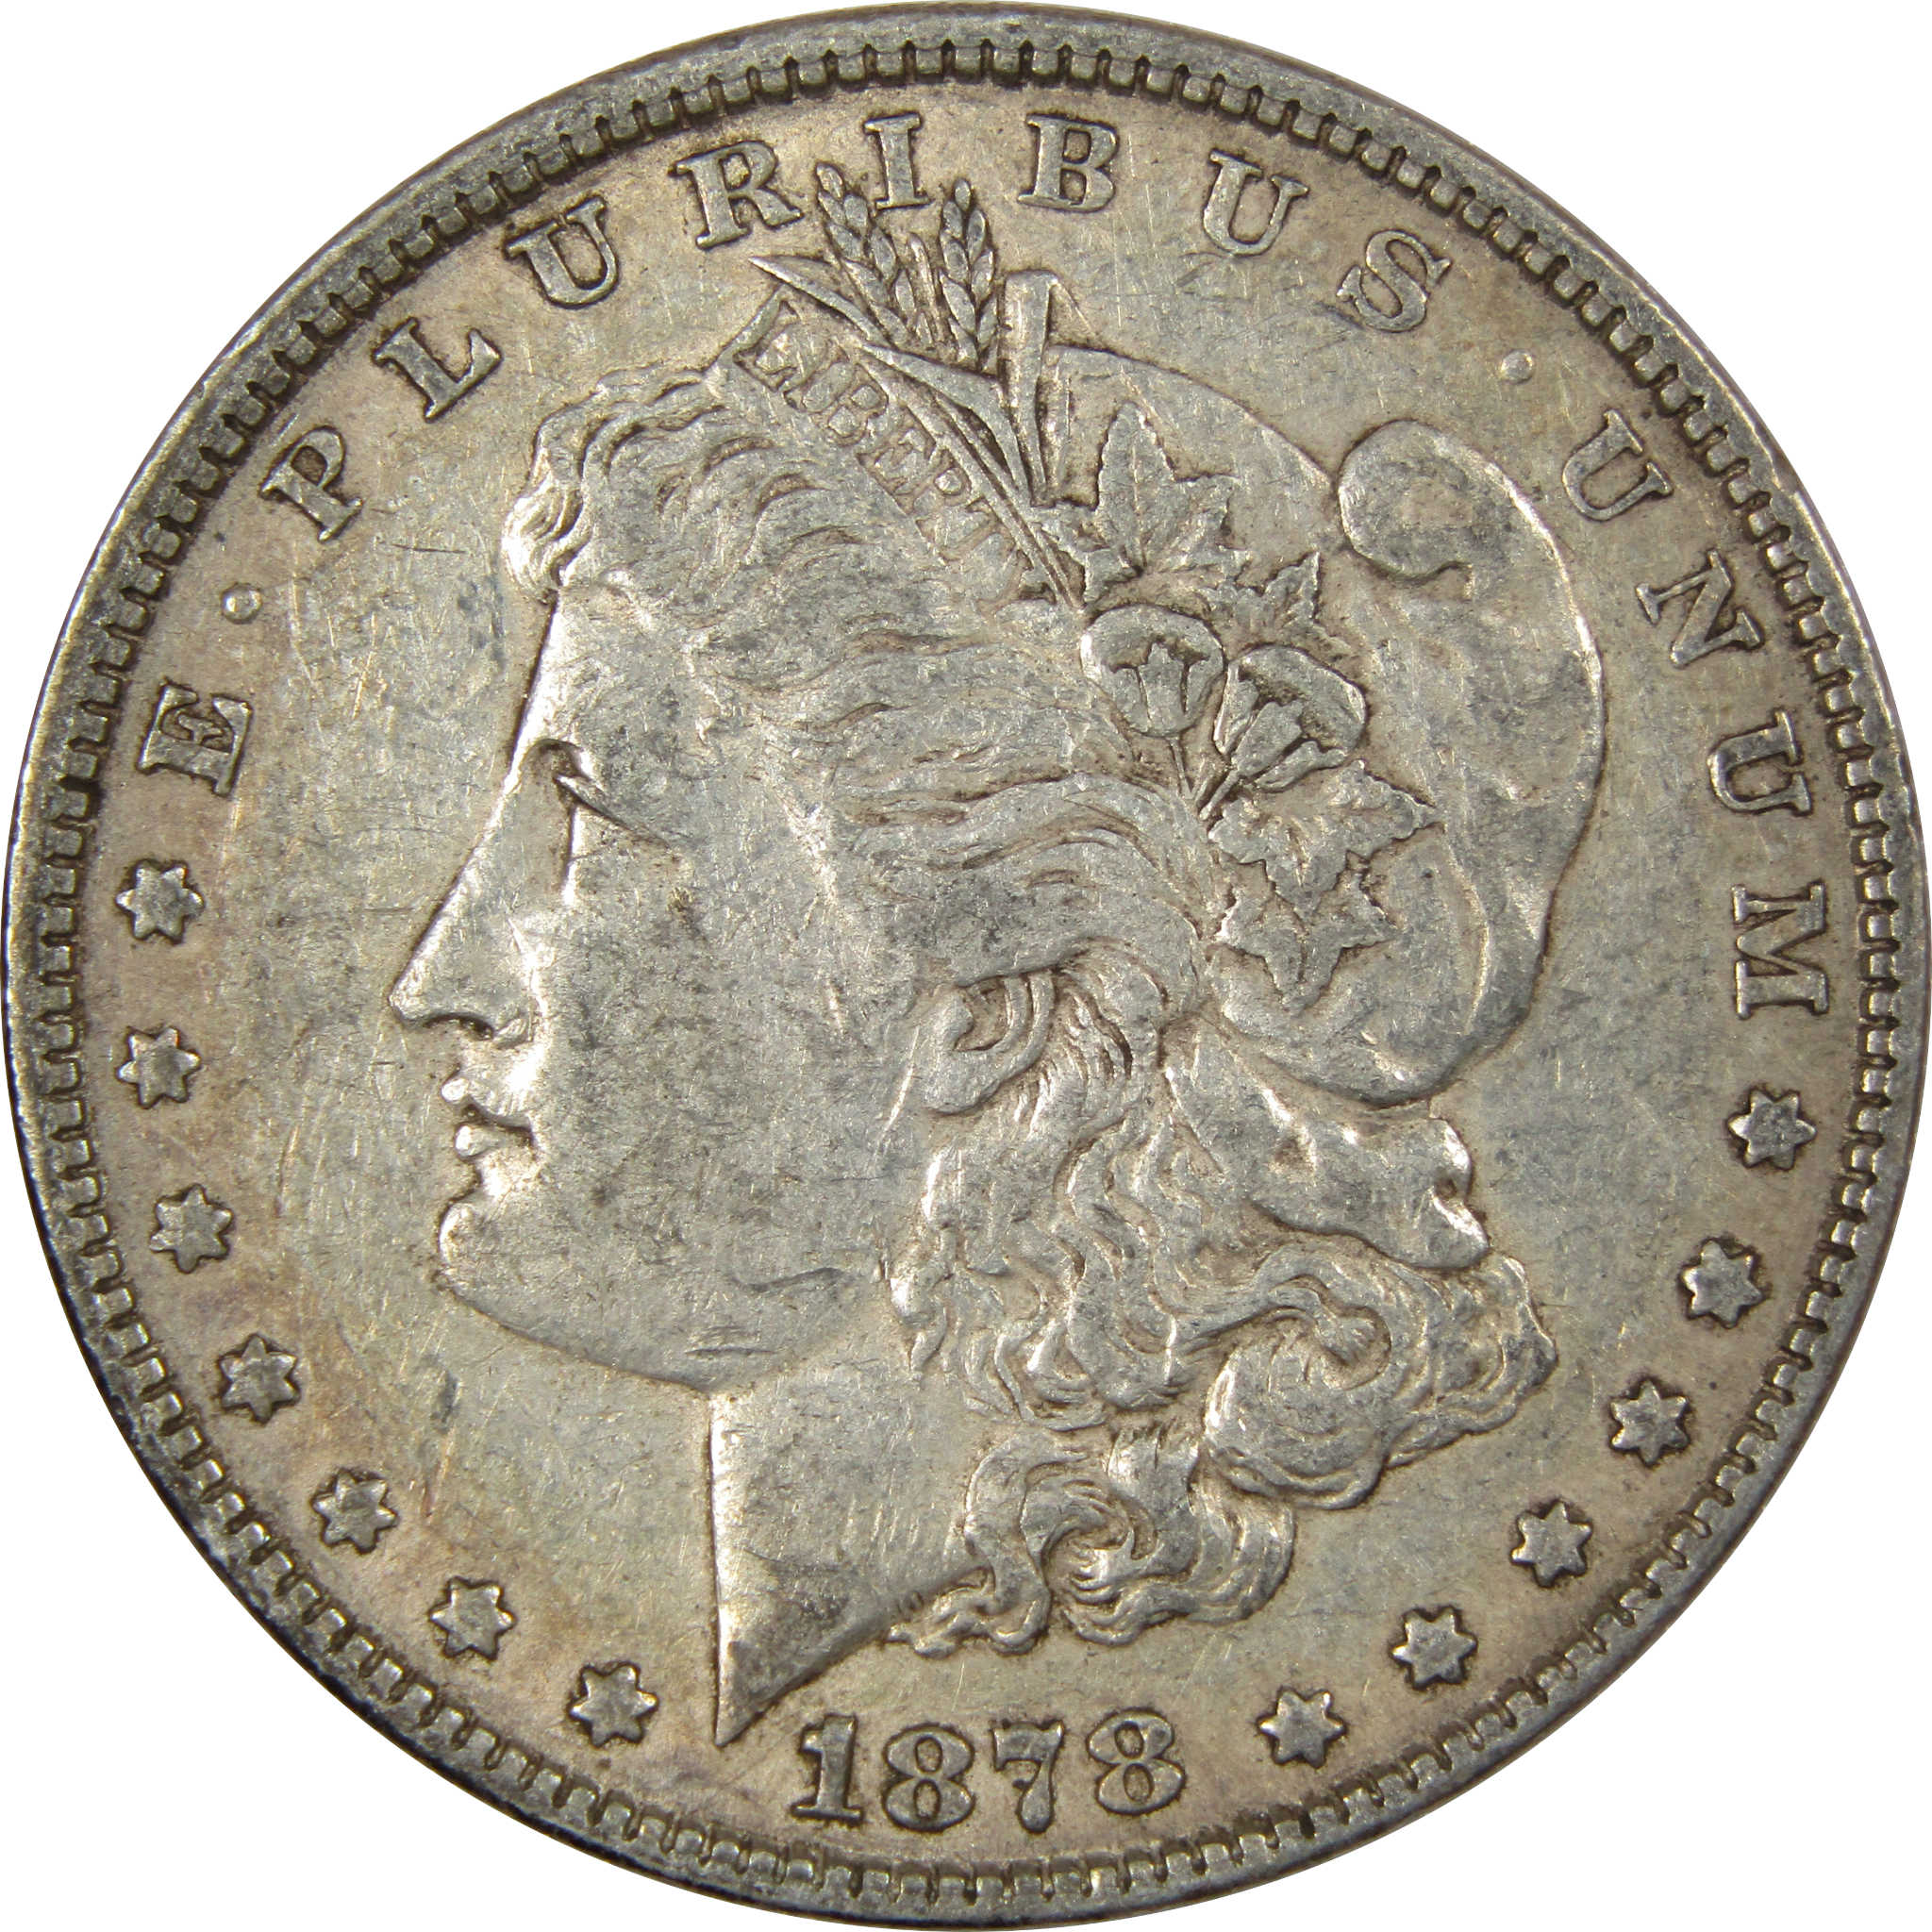 1878 7TF Rev 78 Morgan Dollar Extremely Fine 90% Silver SKU:IPC7239 - Morgan coin - Morgan silver dollar - Morgan silver dollar for sale - Profile Coins &amp; Collectibles